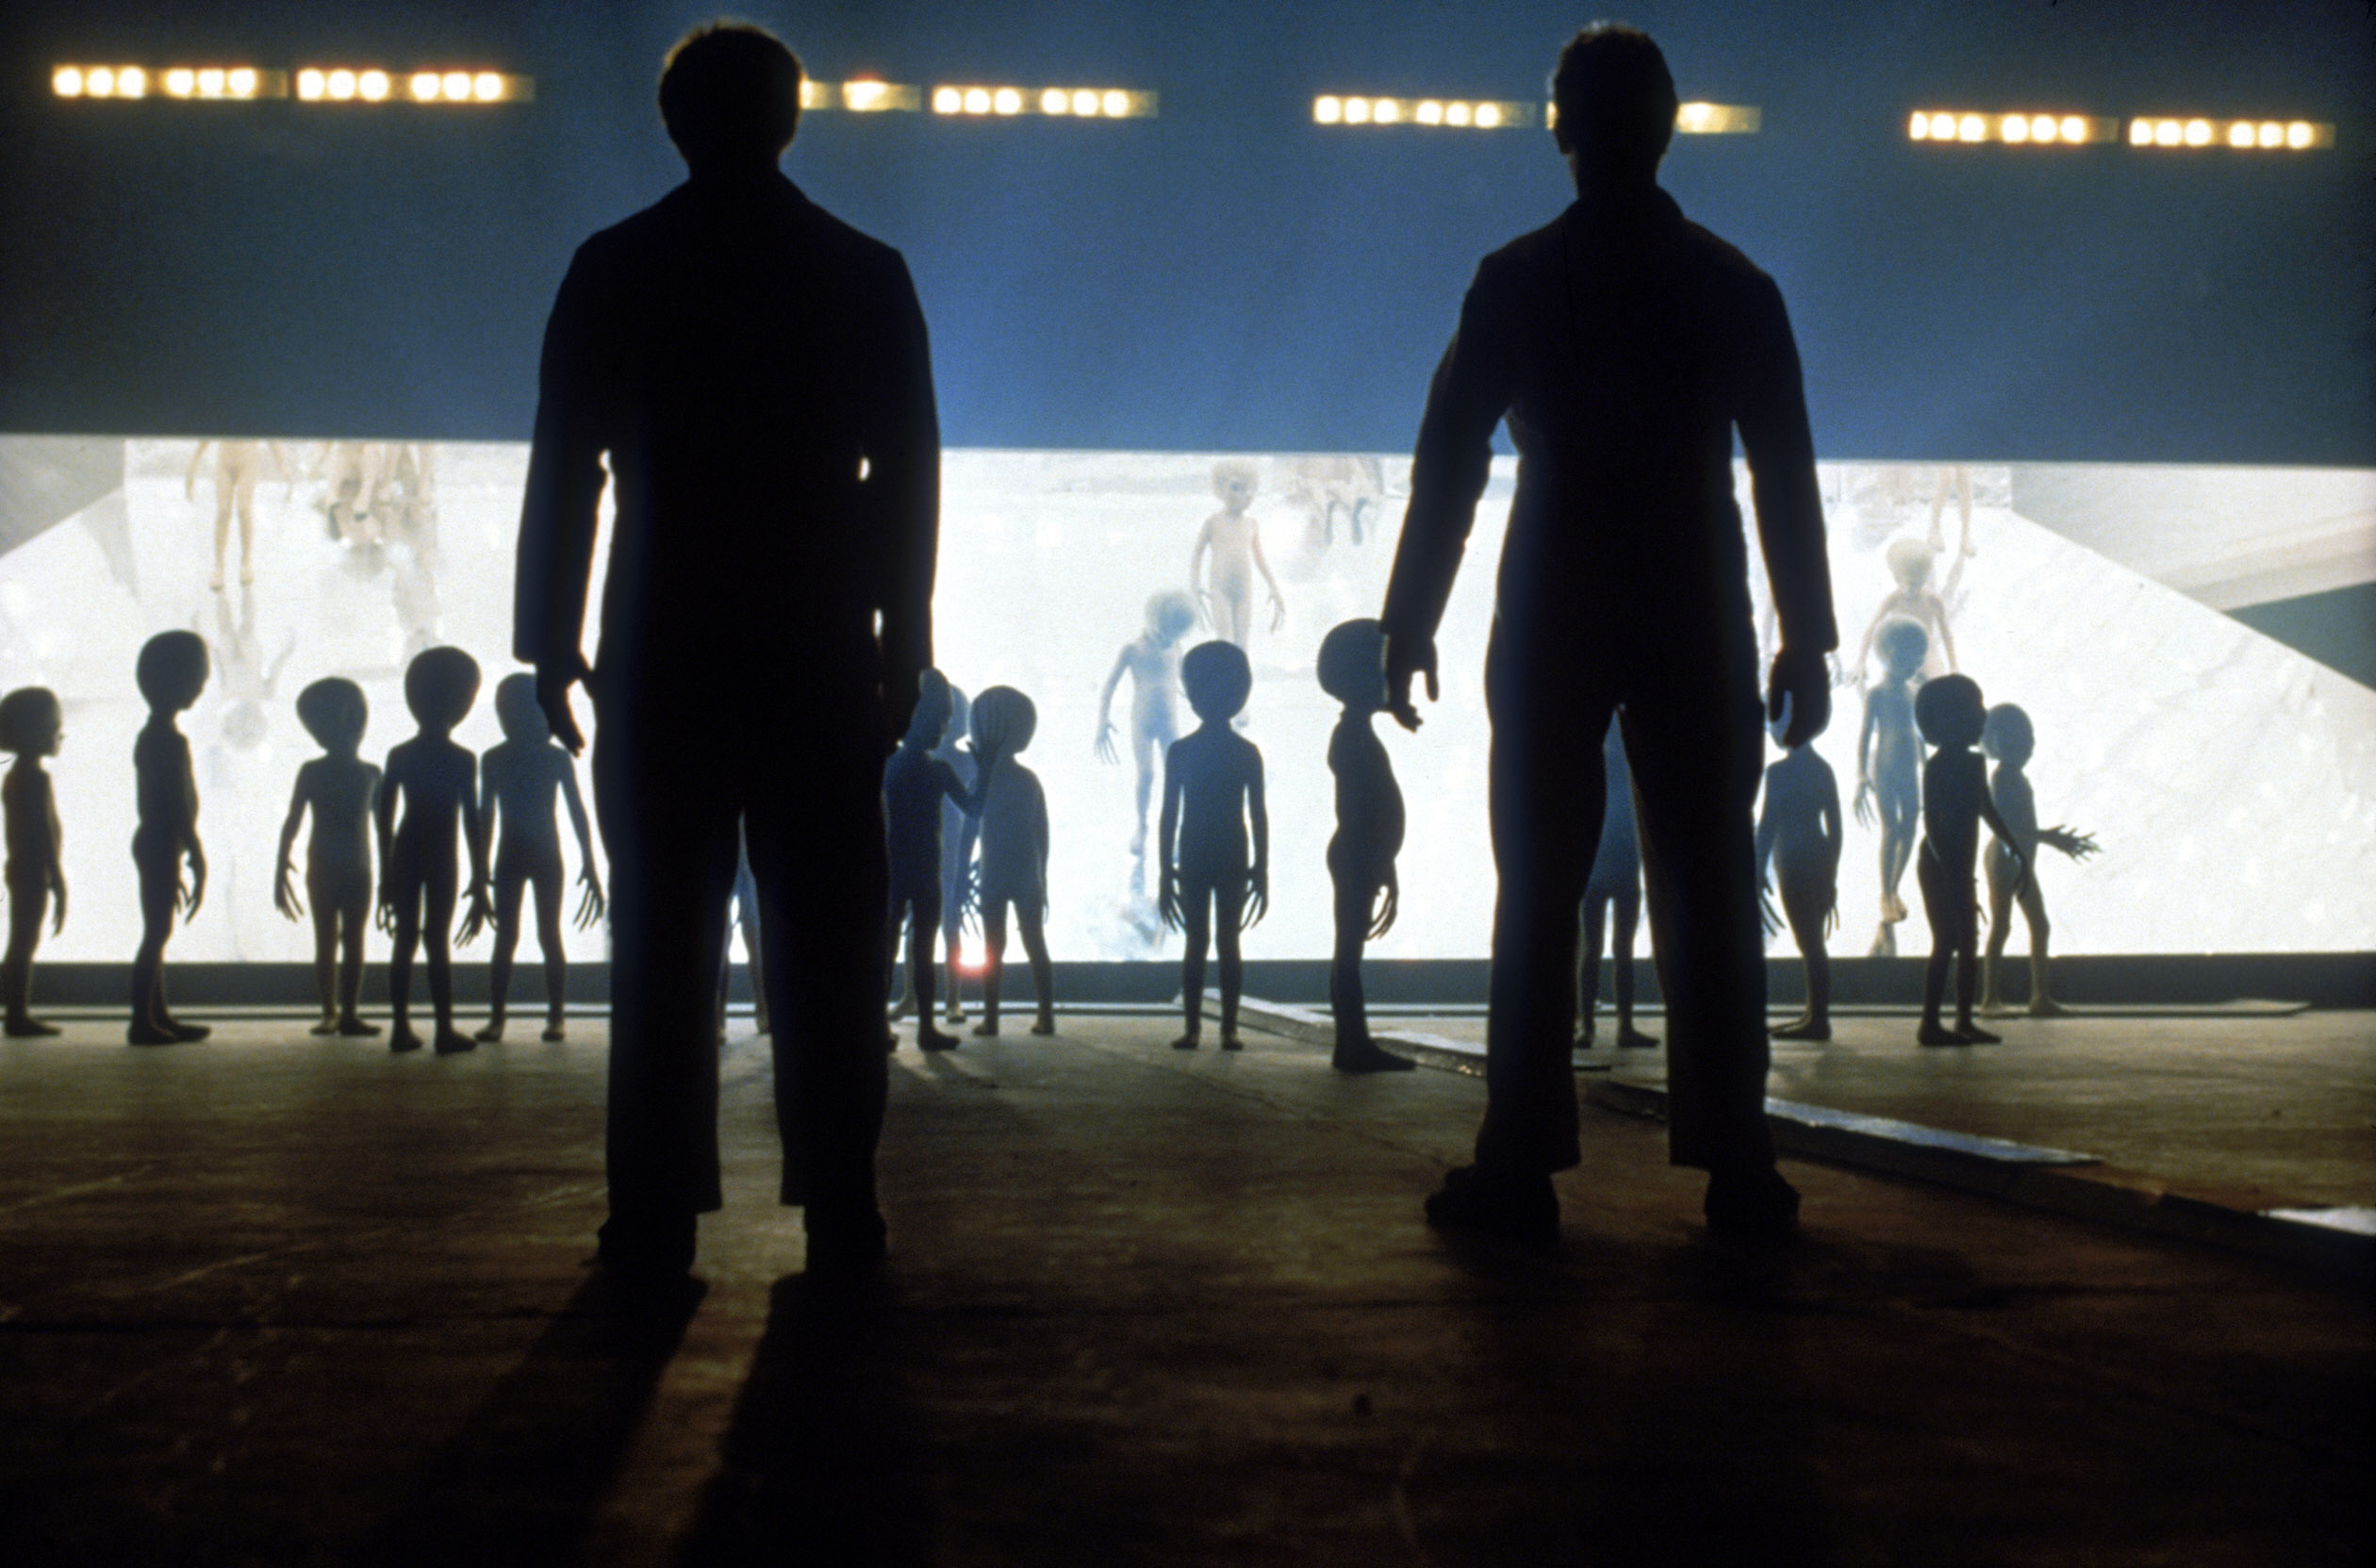 Aliens facing two humans on the set of Close encounters of the third kind